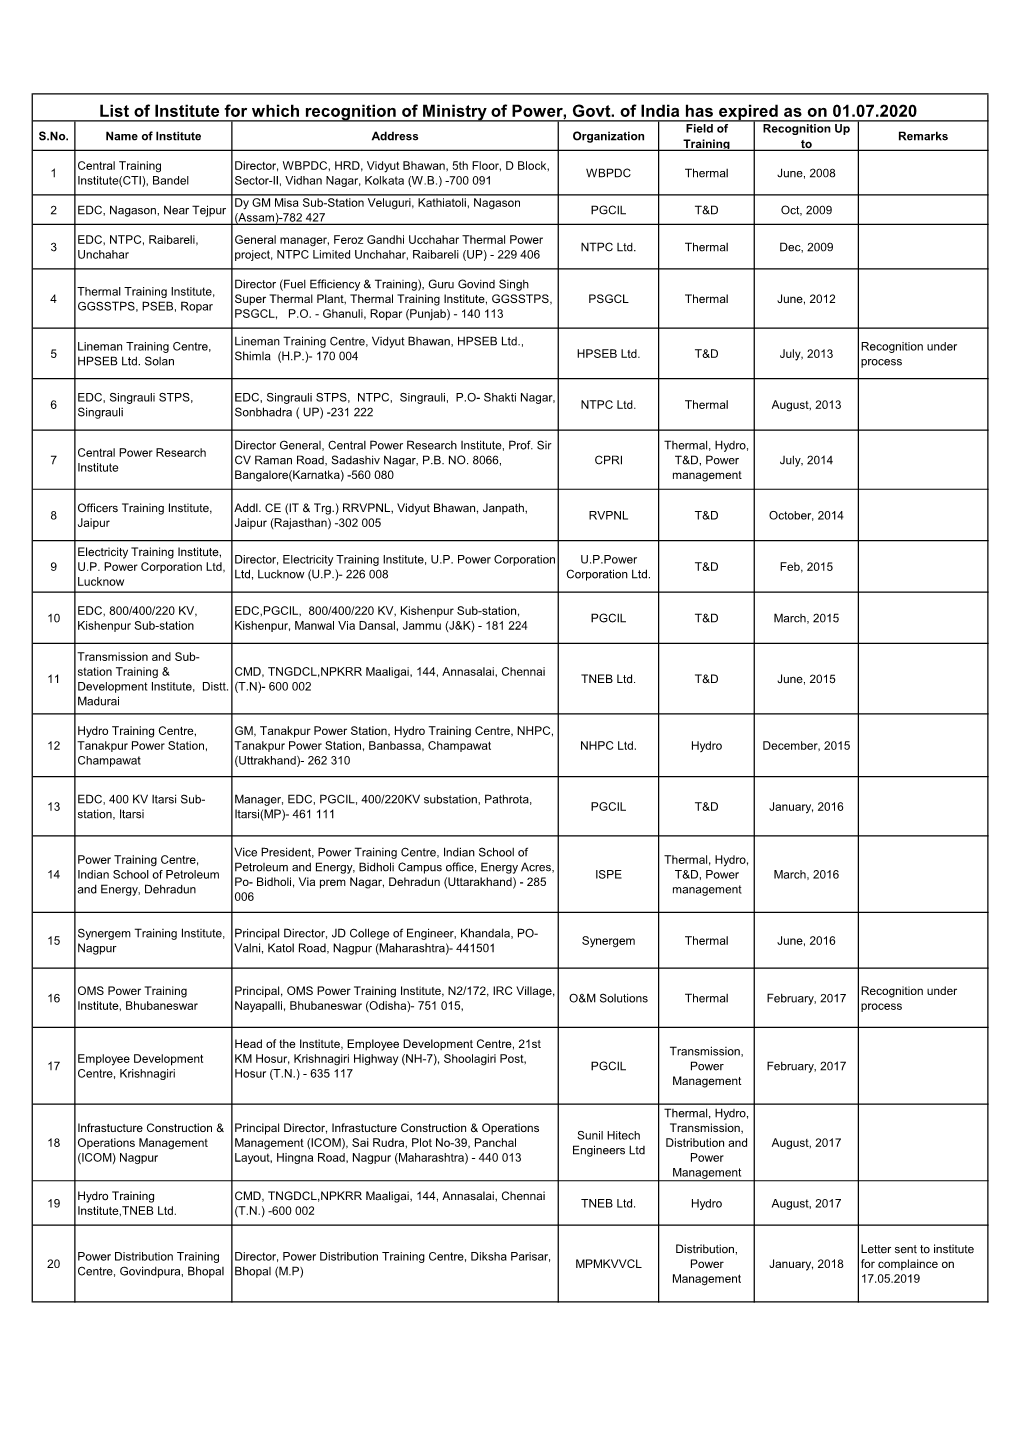 List of Institute for Which Recognition of Ministry of Power, Govt. of India Has Expired As on 01.07.2020 Field of Recognition up S.No